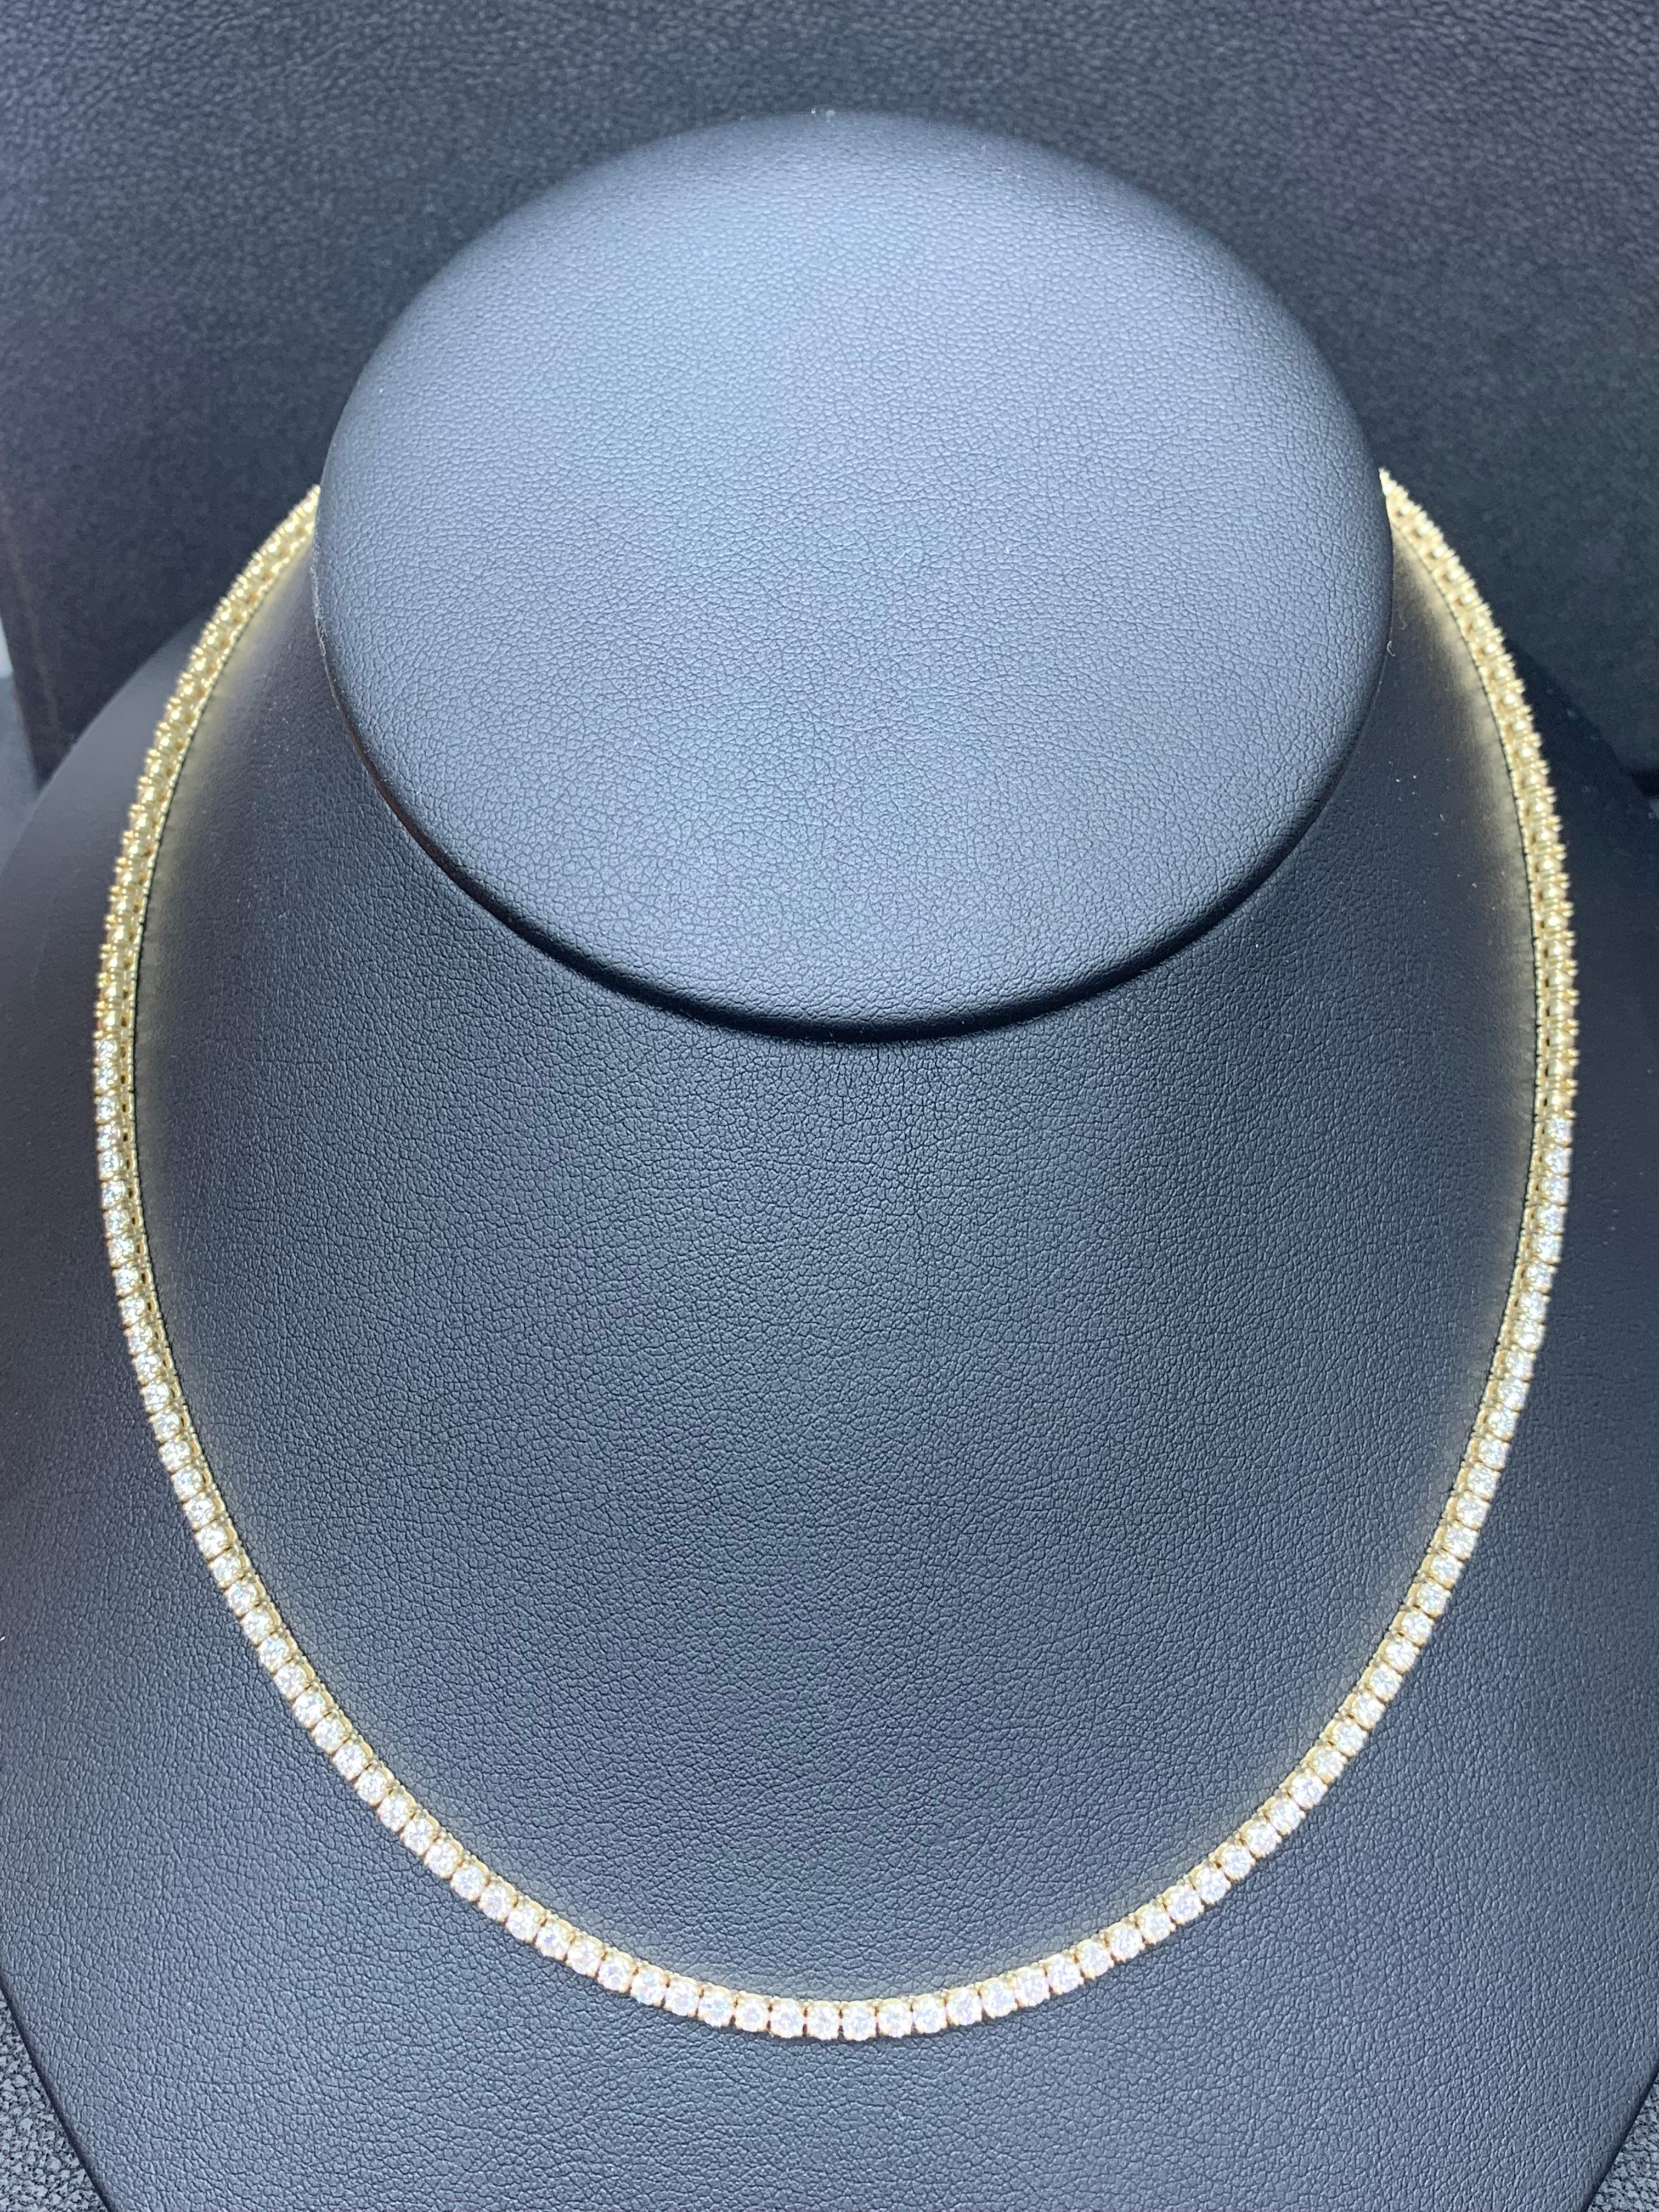 Showcasing a line of half diamond and half metal round brilliant diamonds that elegantly set in a 4 prong setting. 81 Diamonds weigh 4.03 carats total and is set in 14 karat yellow gold. 